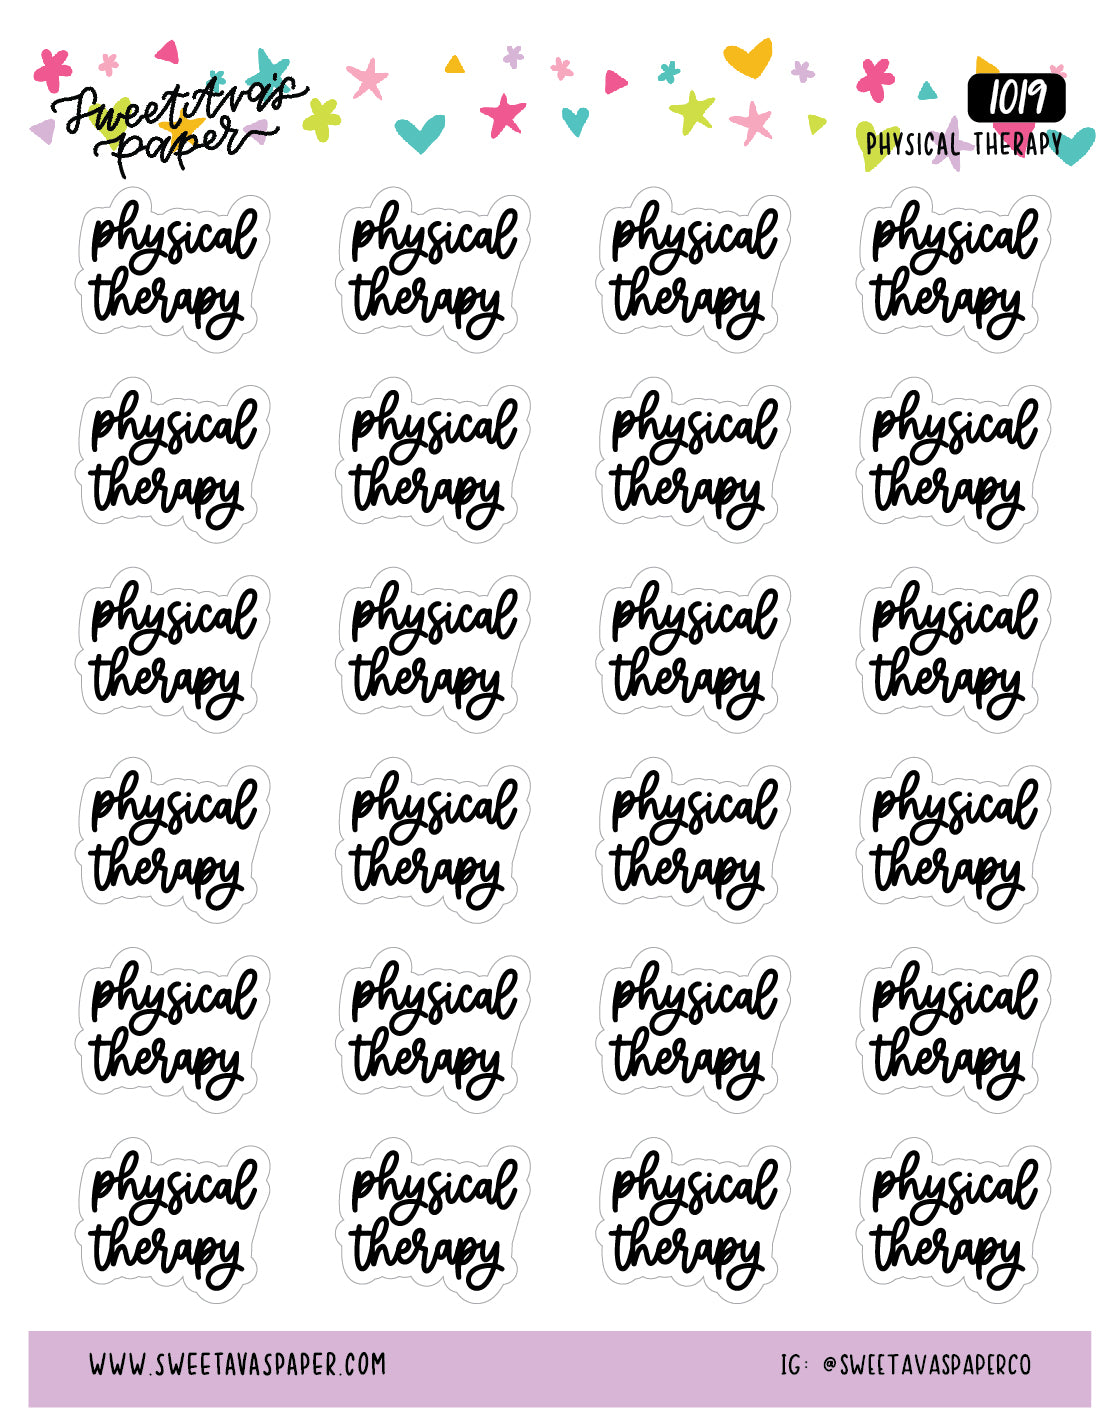 Physical Therapy Planner Stickers - Script / Text - [1019]